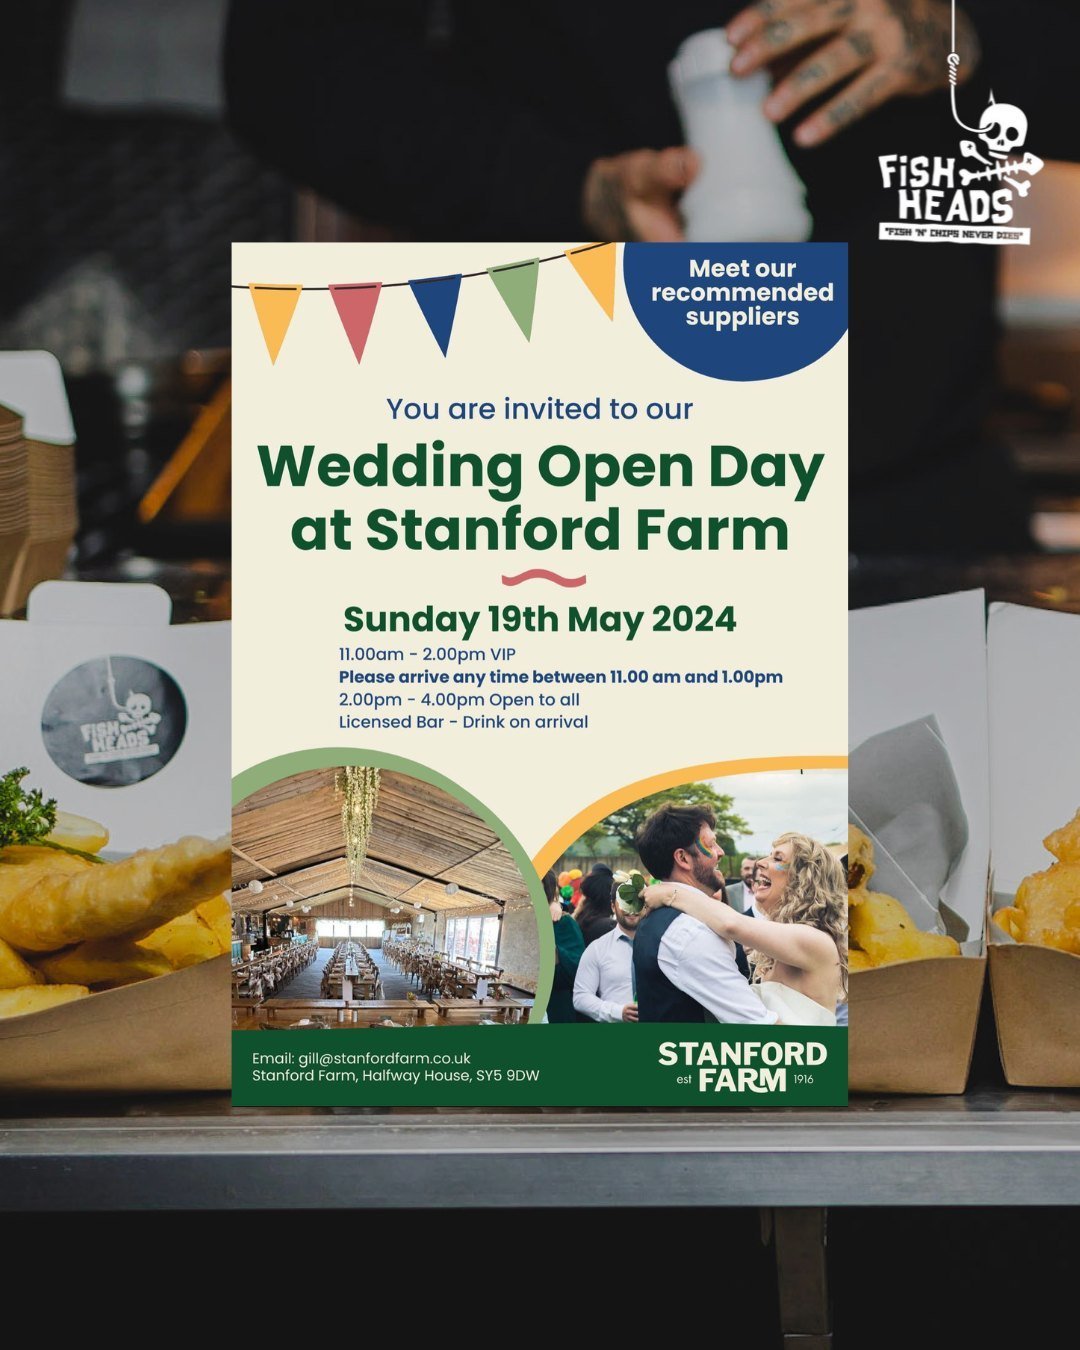 Sunday 19th May, see you at Stanford Farm! 💍🏴&zwj;☠️

That's right, we will be popping up at the wedding open day at Stanford Farm, and we are looking forward to meeting all of you there and whipping up some fish &amp; chips for you to try!

Who's 